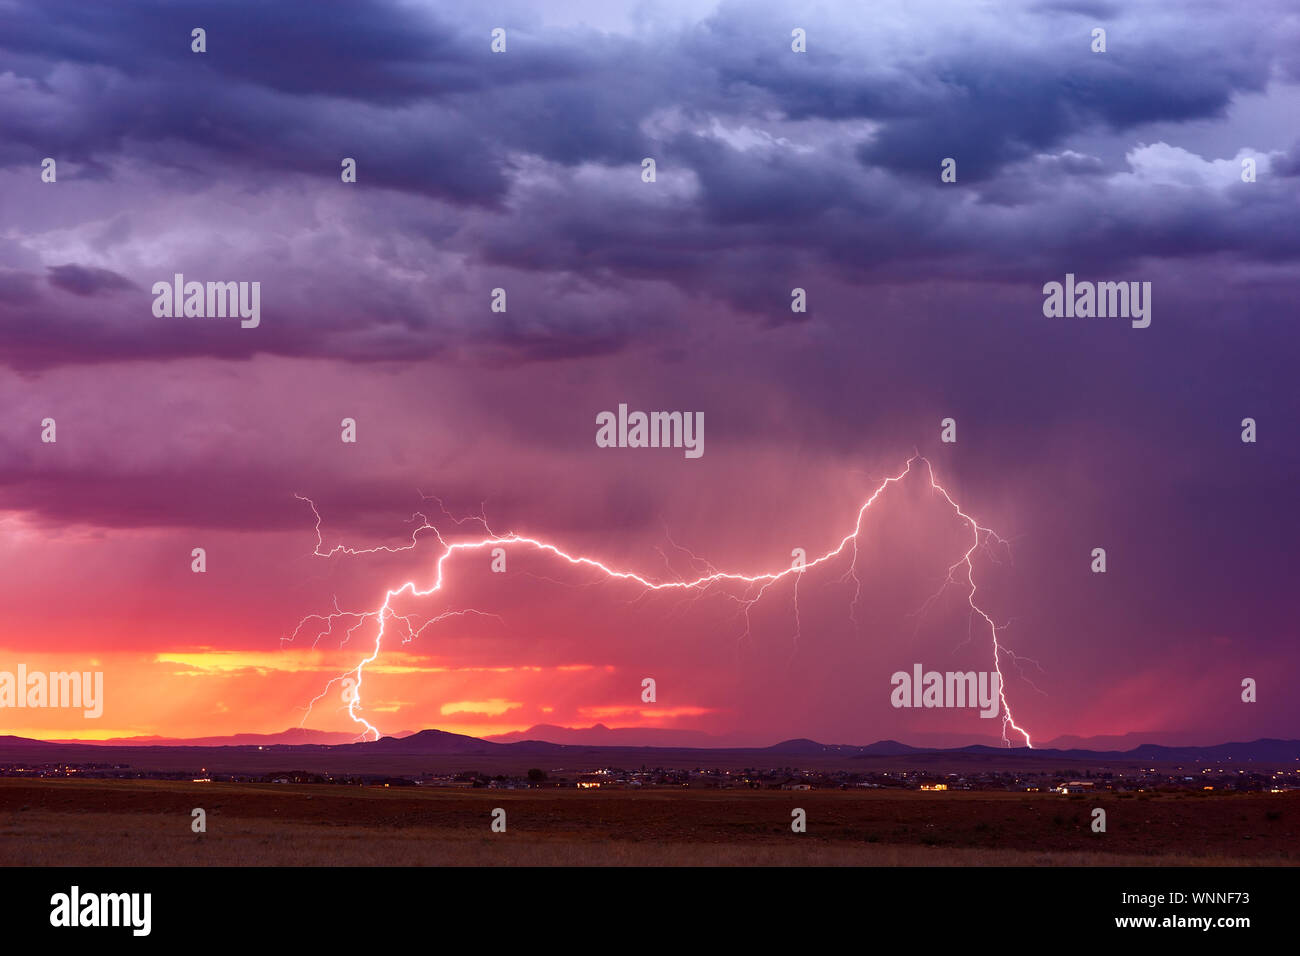 Abstract realistic nature red lightning thunder background